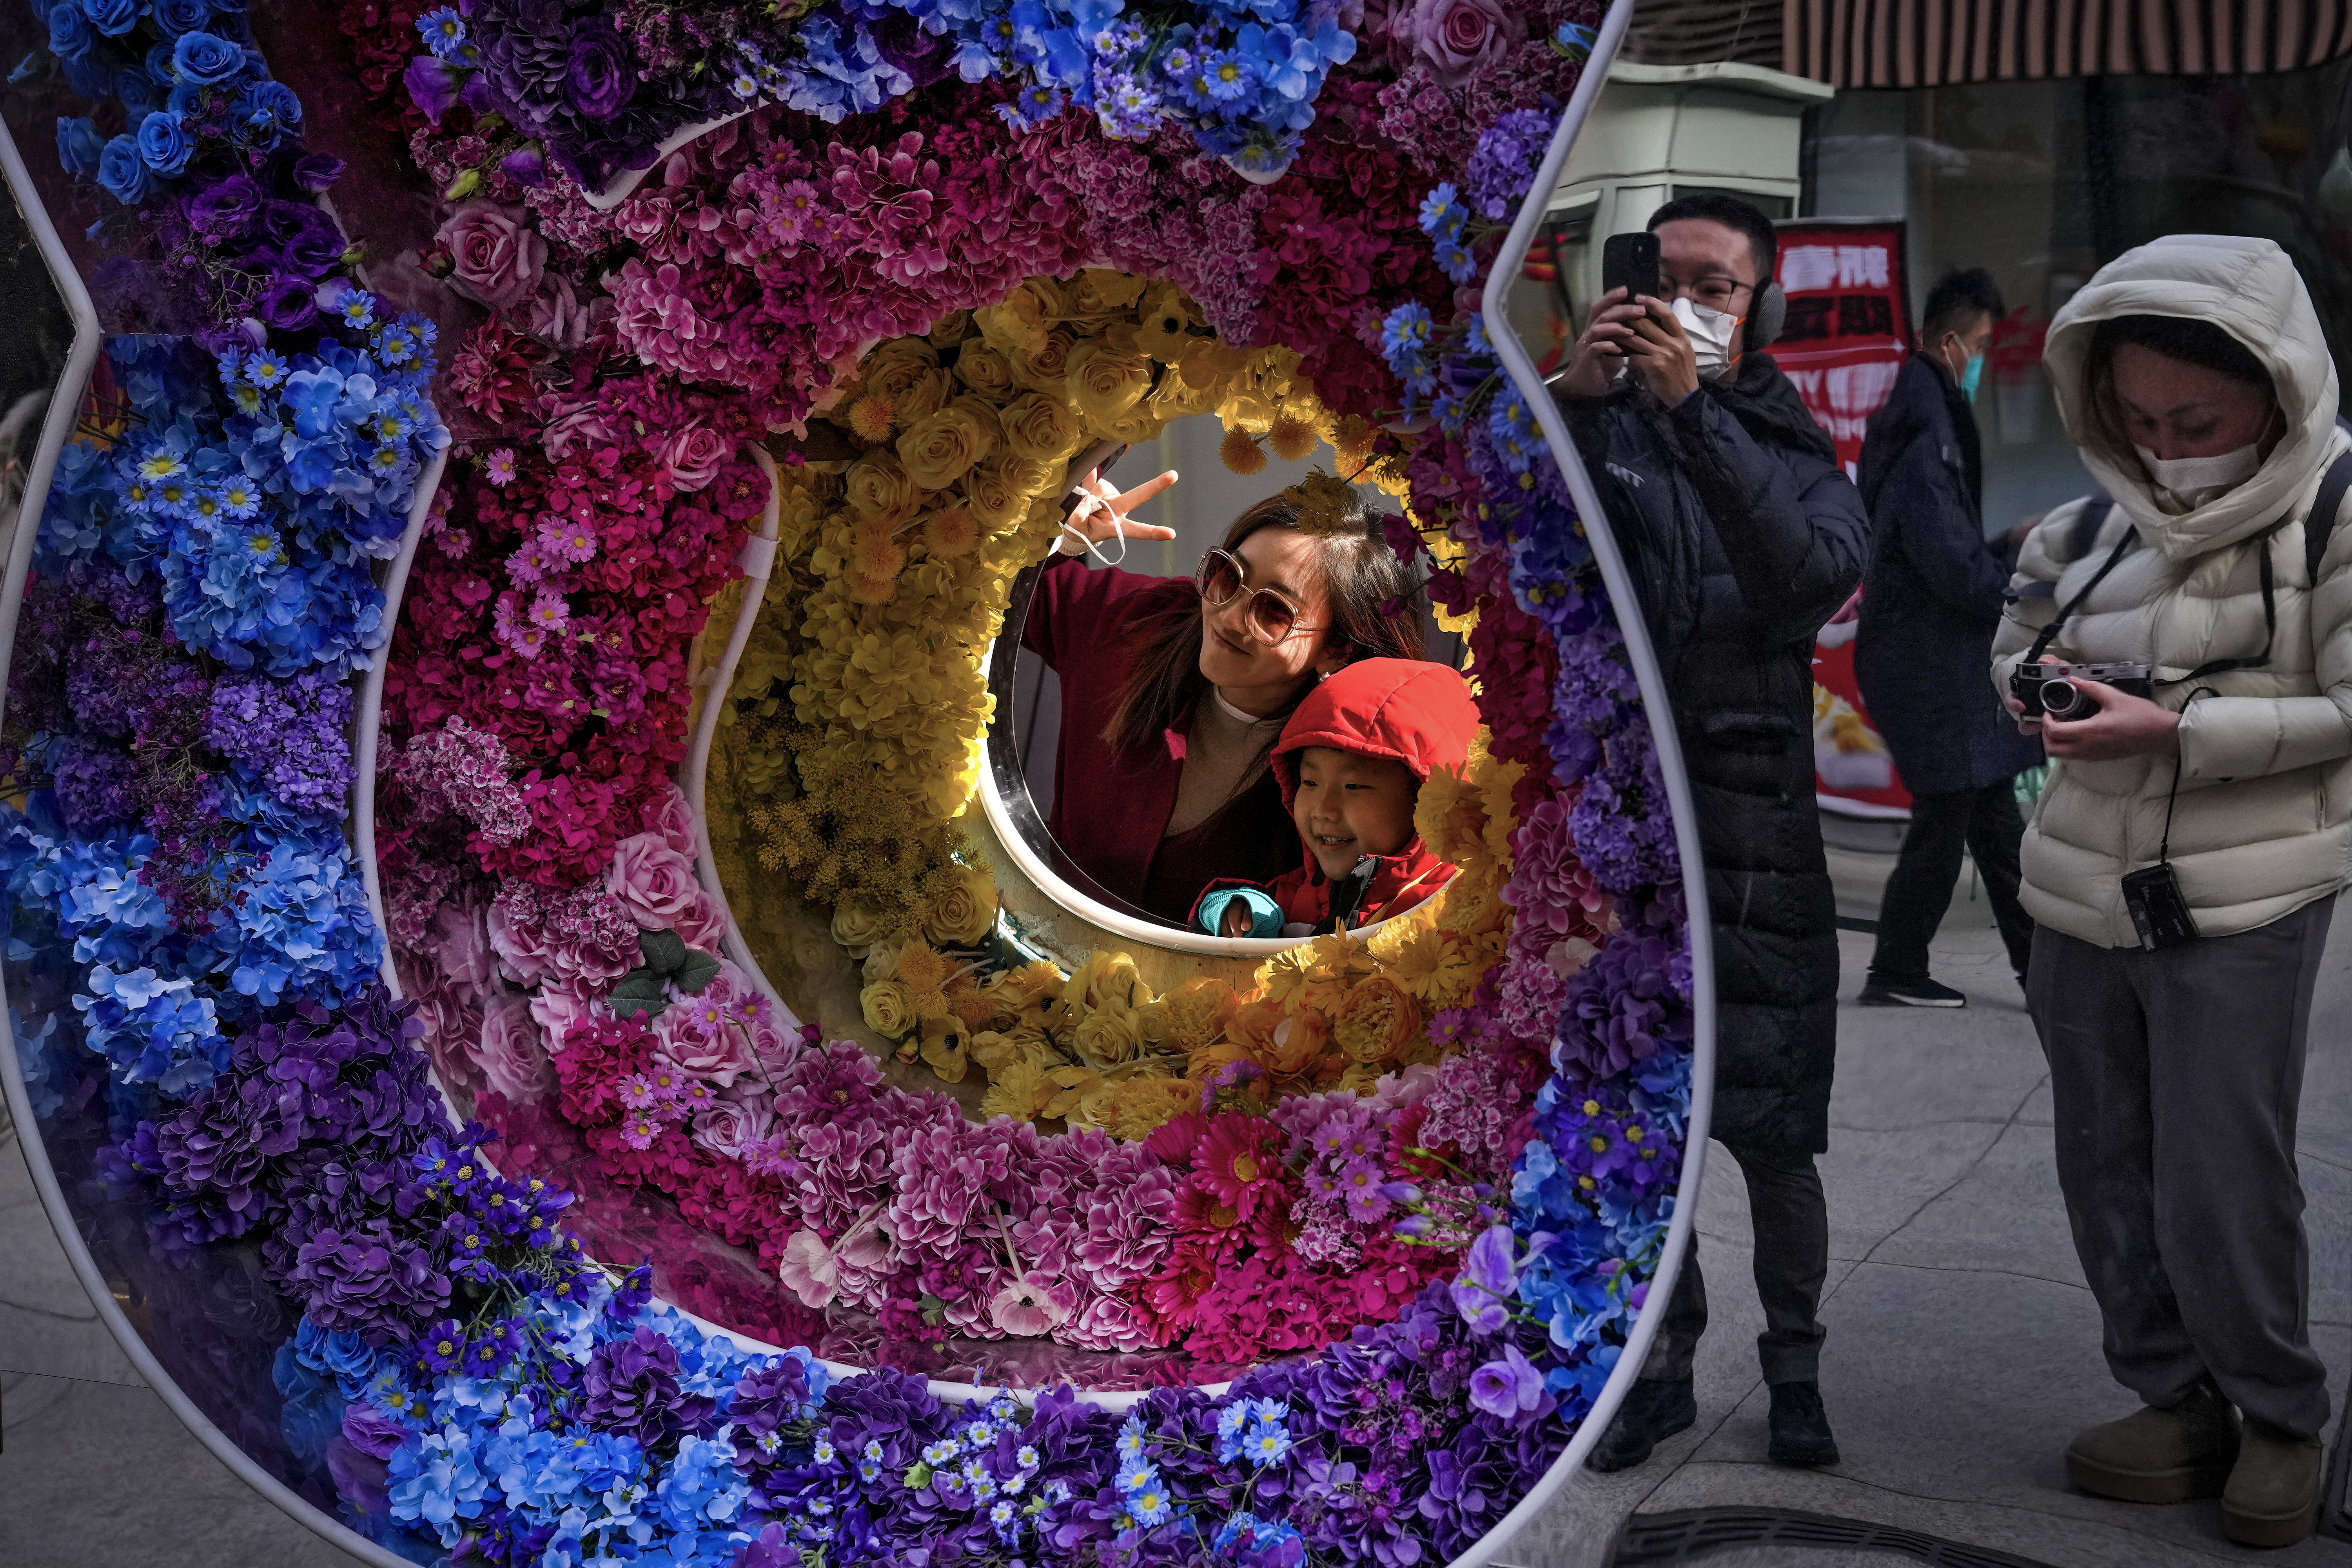 A woman and a girl pose for a souvenir photo with rabbit-shaped floral decorations at a pedestrian street in Qianmen, on the first day of the Year of the Rabbit in Beijing, Sunday, Jan. 22, 2023. People across China celebrated the change of the lunar year on Sunday with large family gatherings and massive visits to temples, after the government withdrew its strict measures of "zero COVID", in the first full-scale celebration since the pandemic began three years earlier.  (AP Photo/Andy Wong)